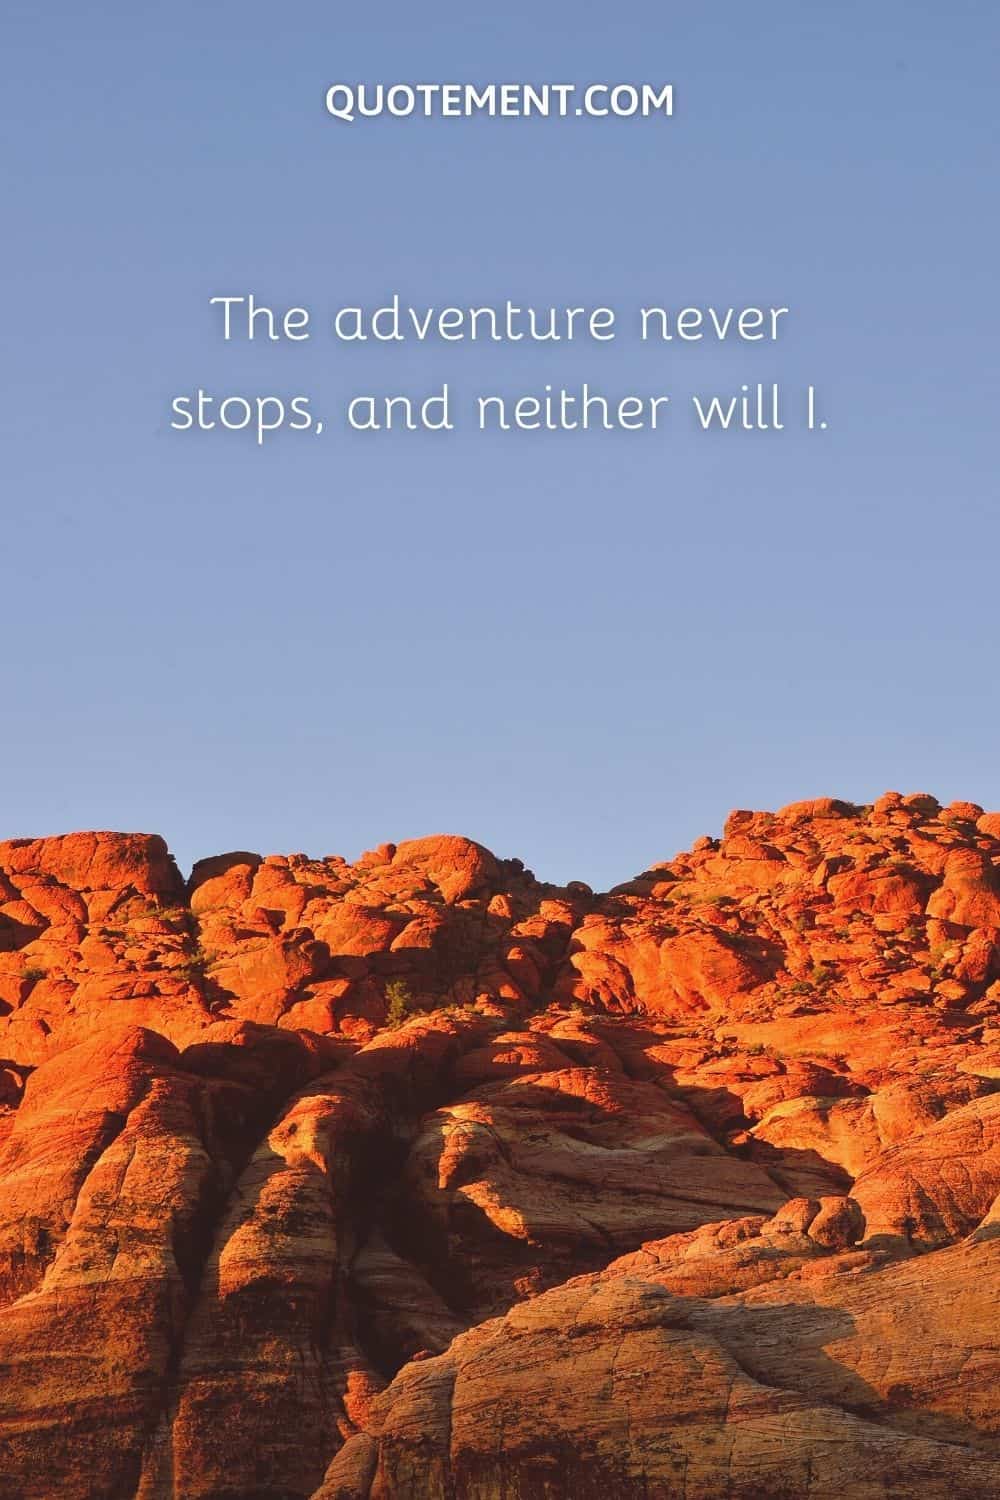 The adventure never stops, and neither will I.